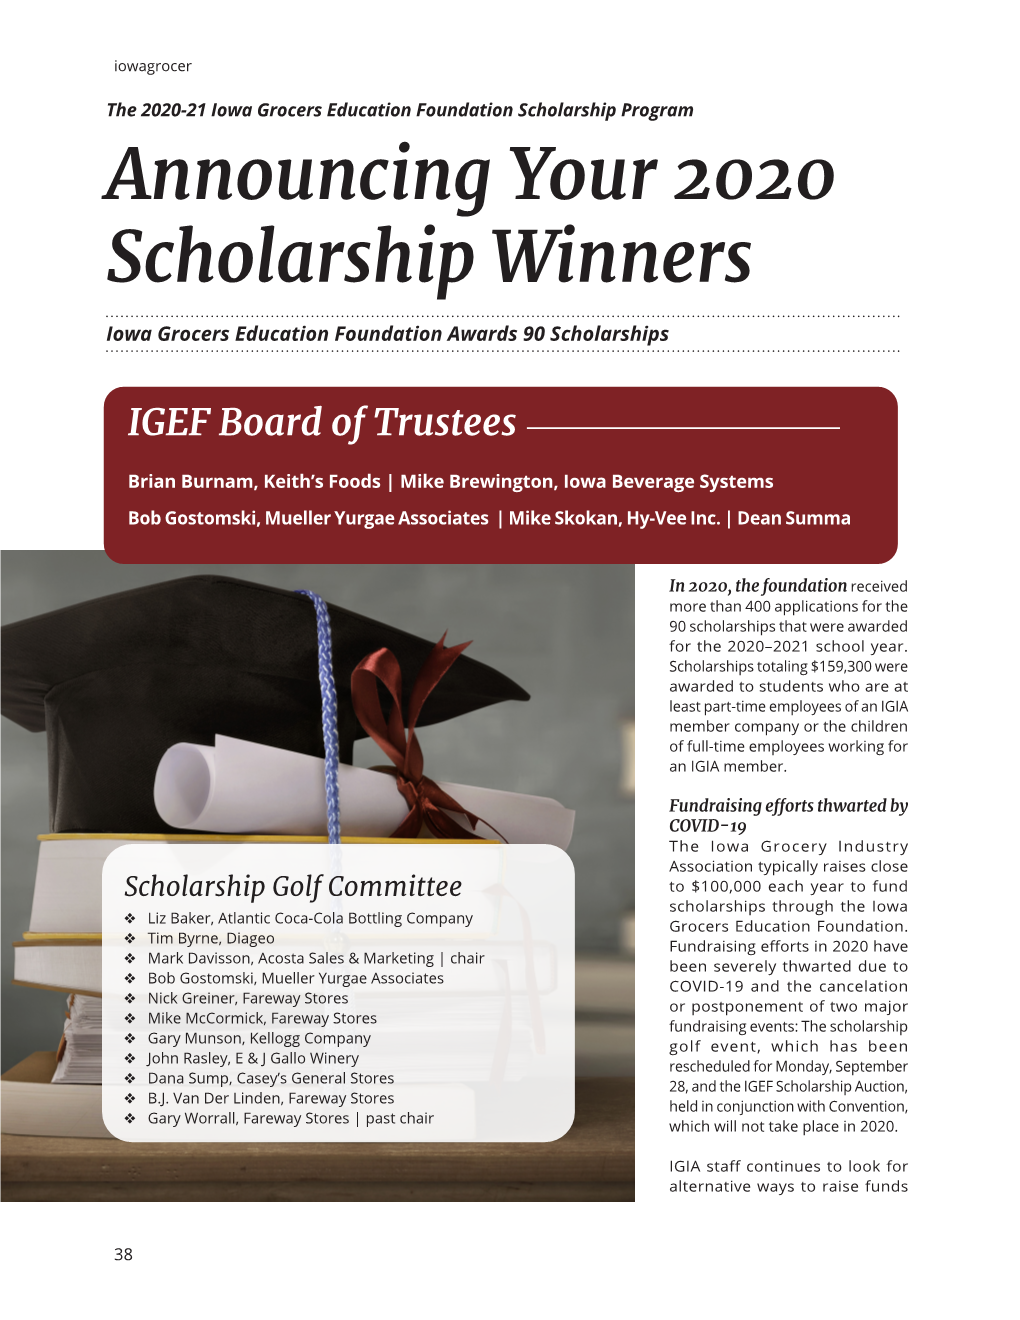 Announcing Your 2020 Scholarship Winners